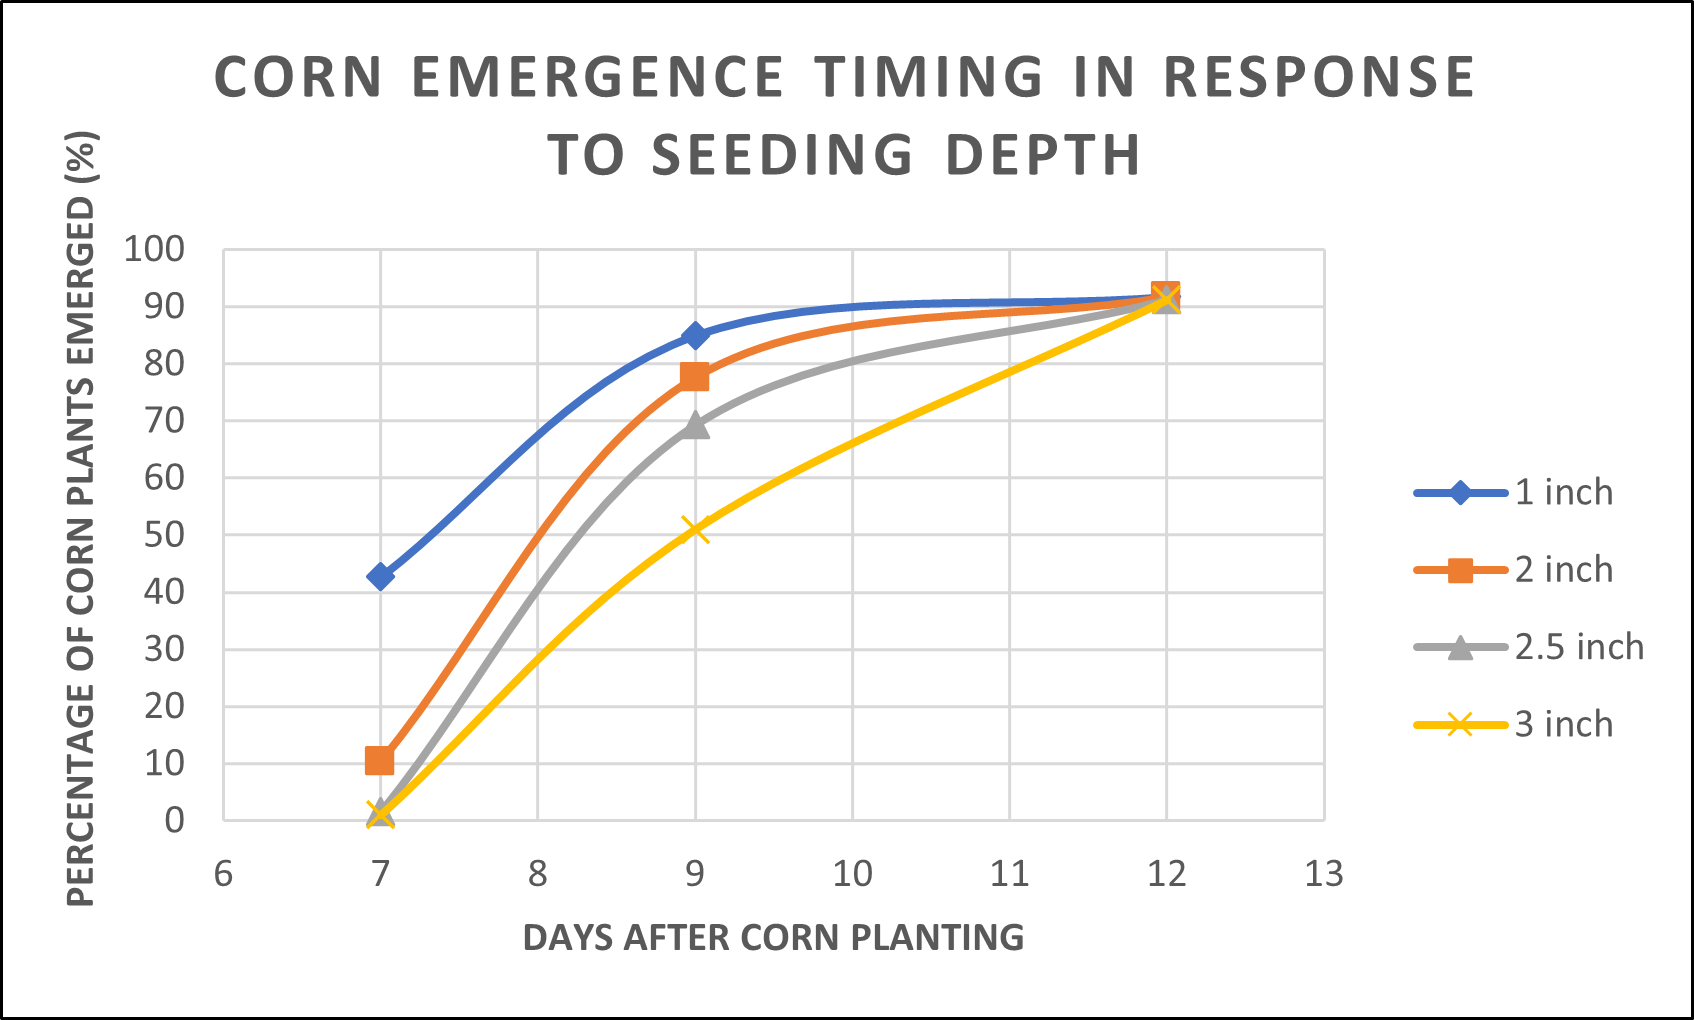 Figure 1. Corn seedling emergence (%) after corn planting in response to seeding depth. Data includes both hybrids. 